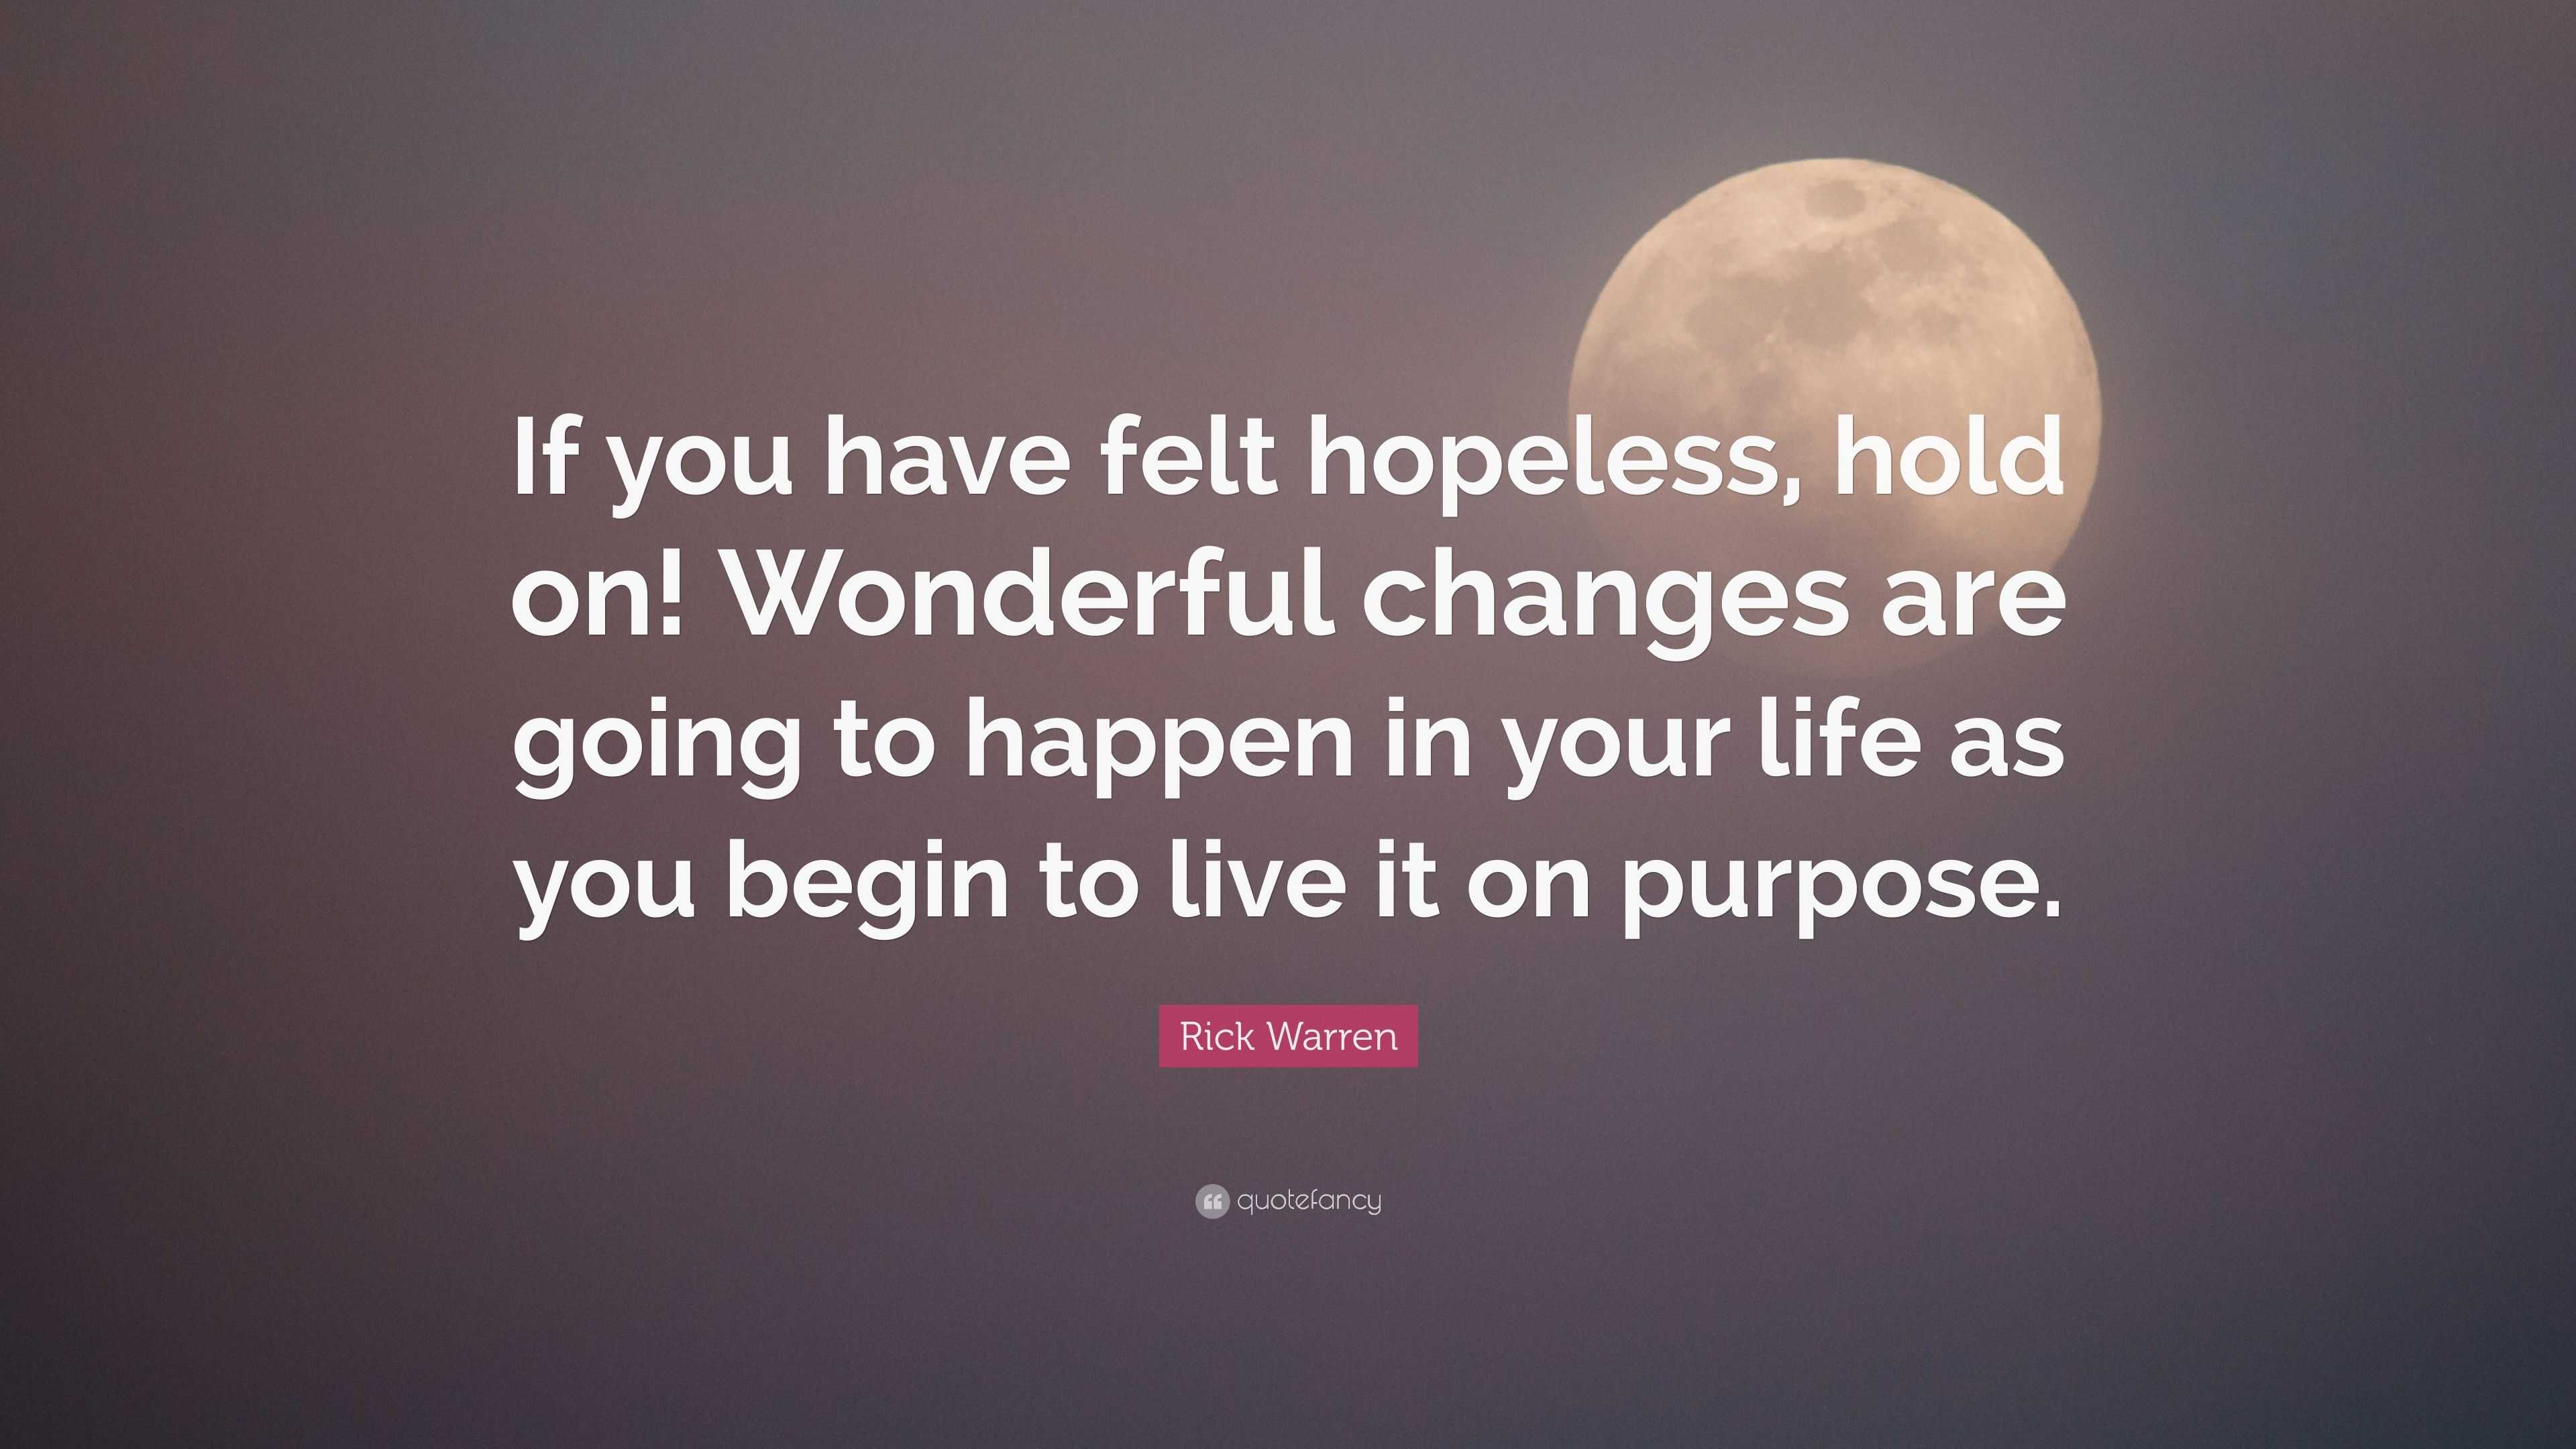 Rick Warren Quote: “If you have felt hopeless, hold on! Wonderful ...